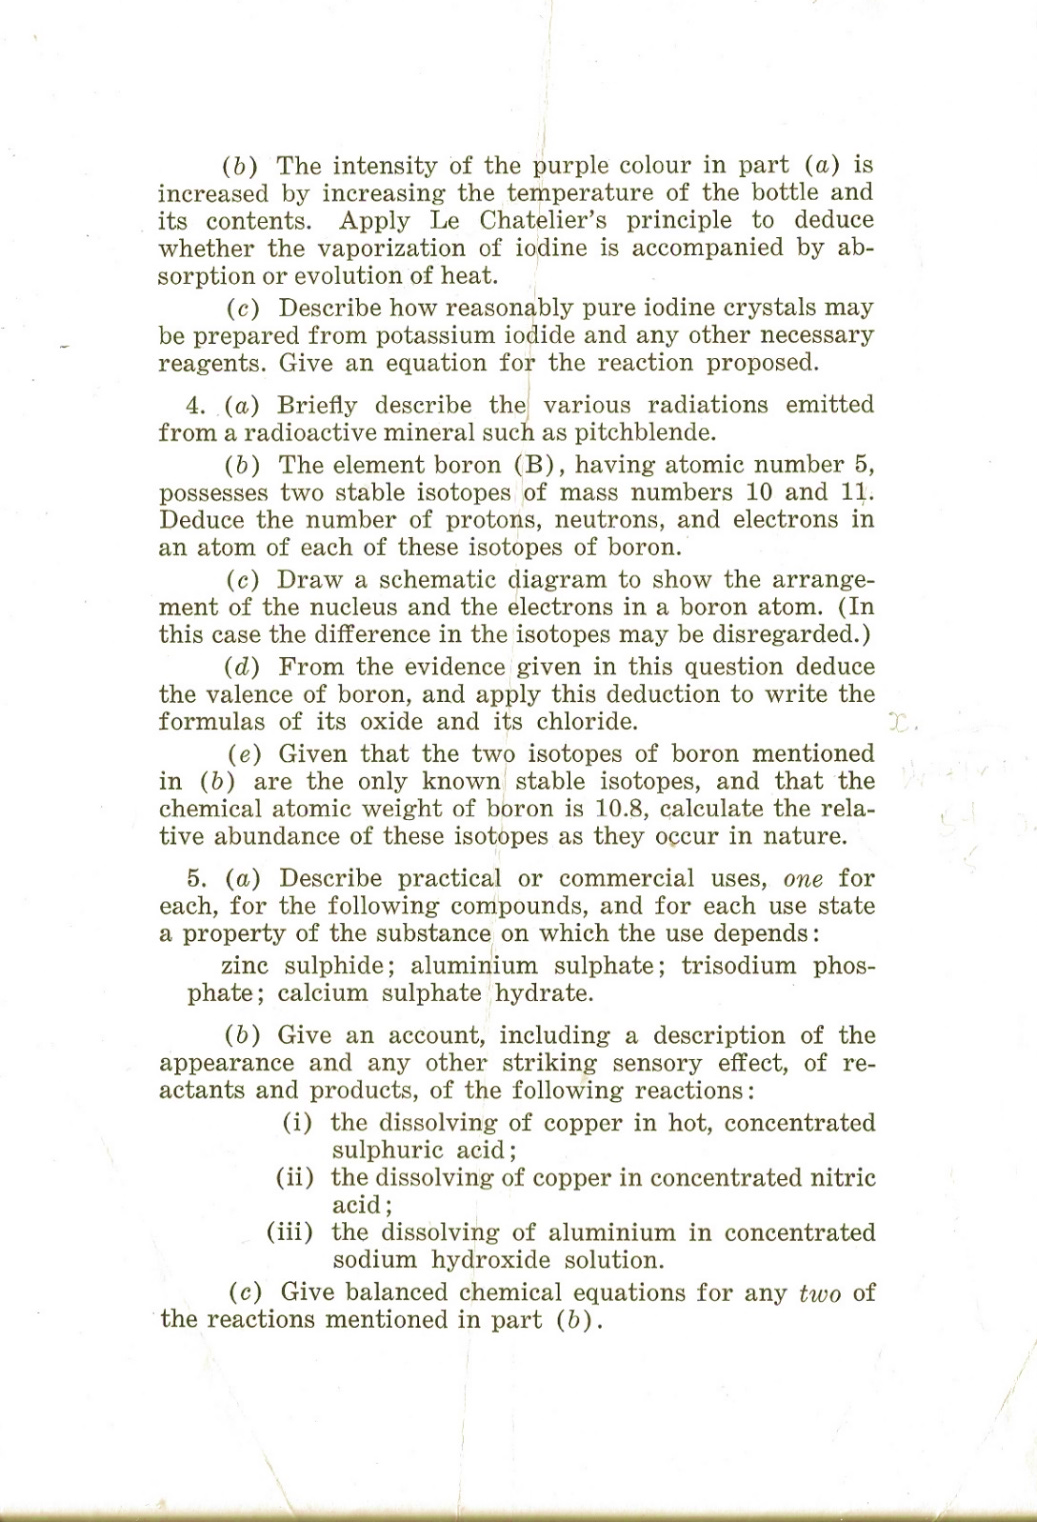 page 2 of an old 1958 Department of Education, Ontario grade 13 Chemistry exam